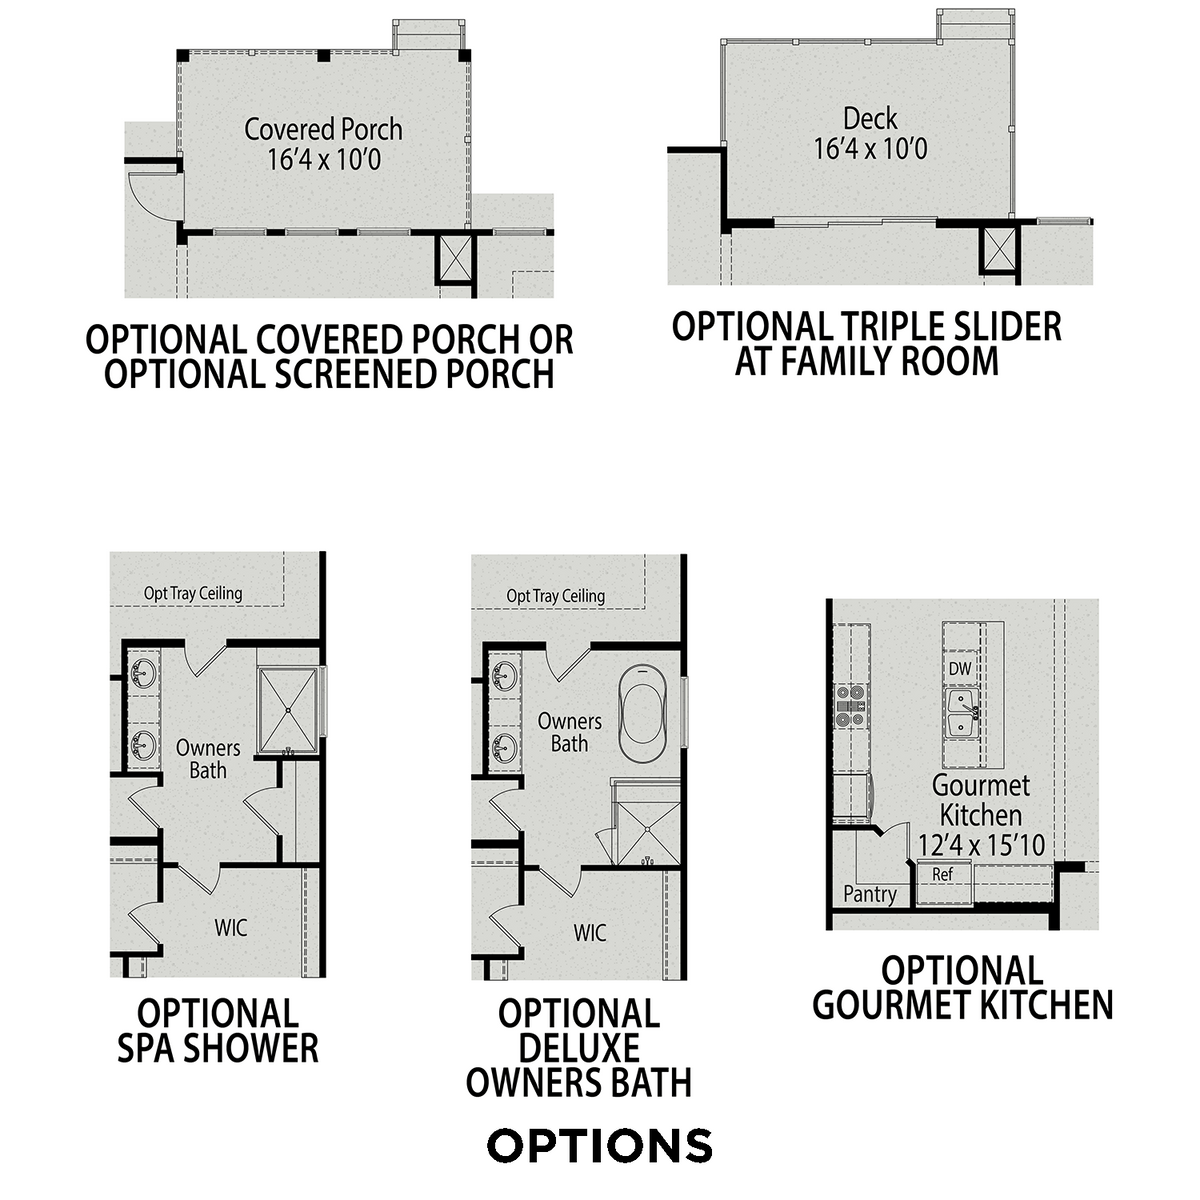 3 - The Cypress A buildable floor plan layout in Davidson Homes' Weatherford East community.